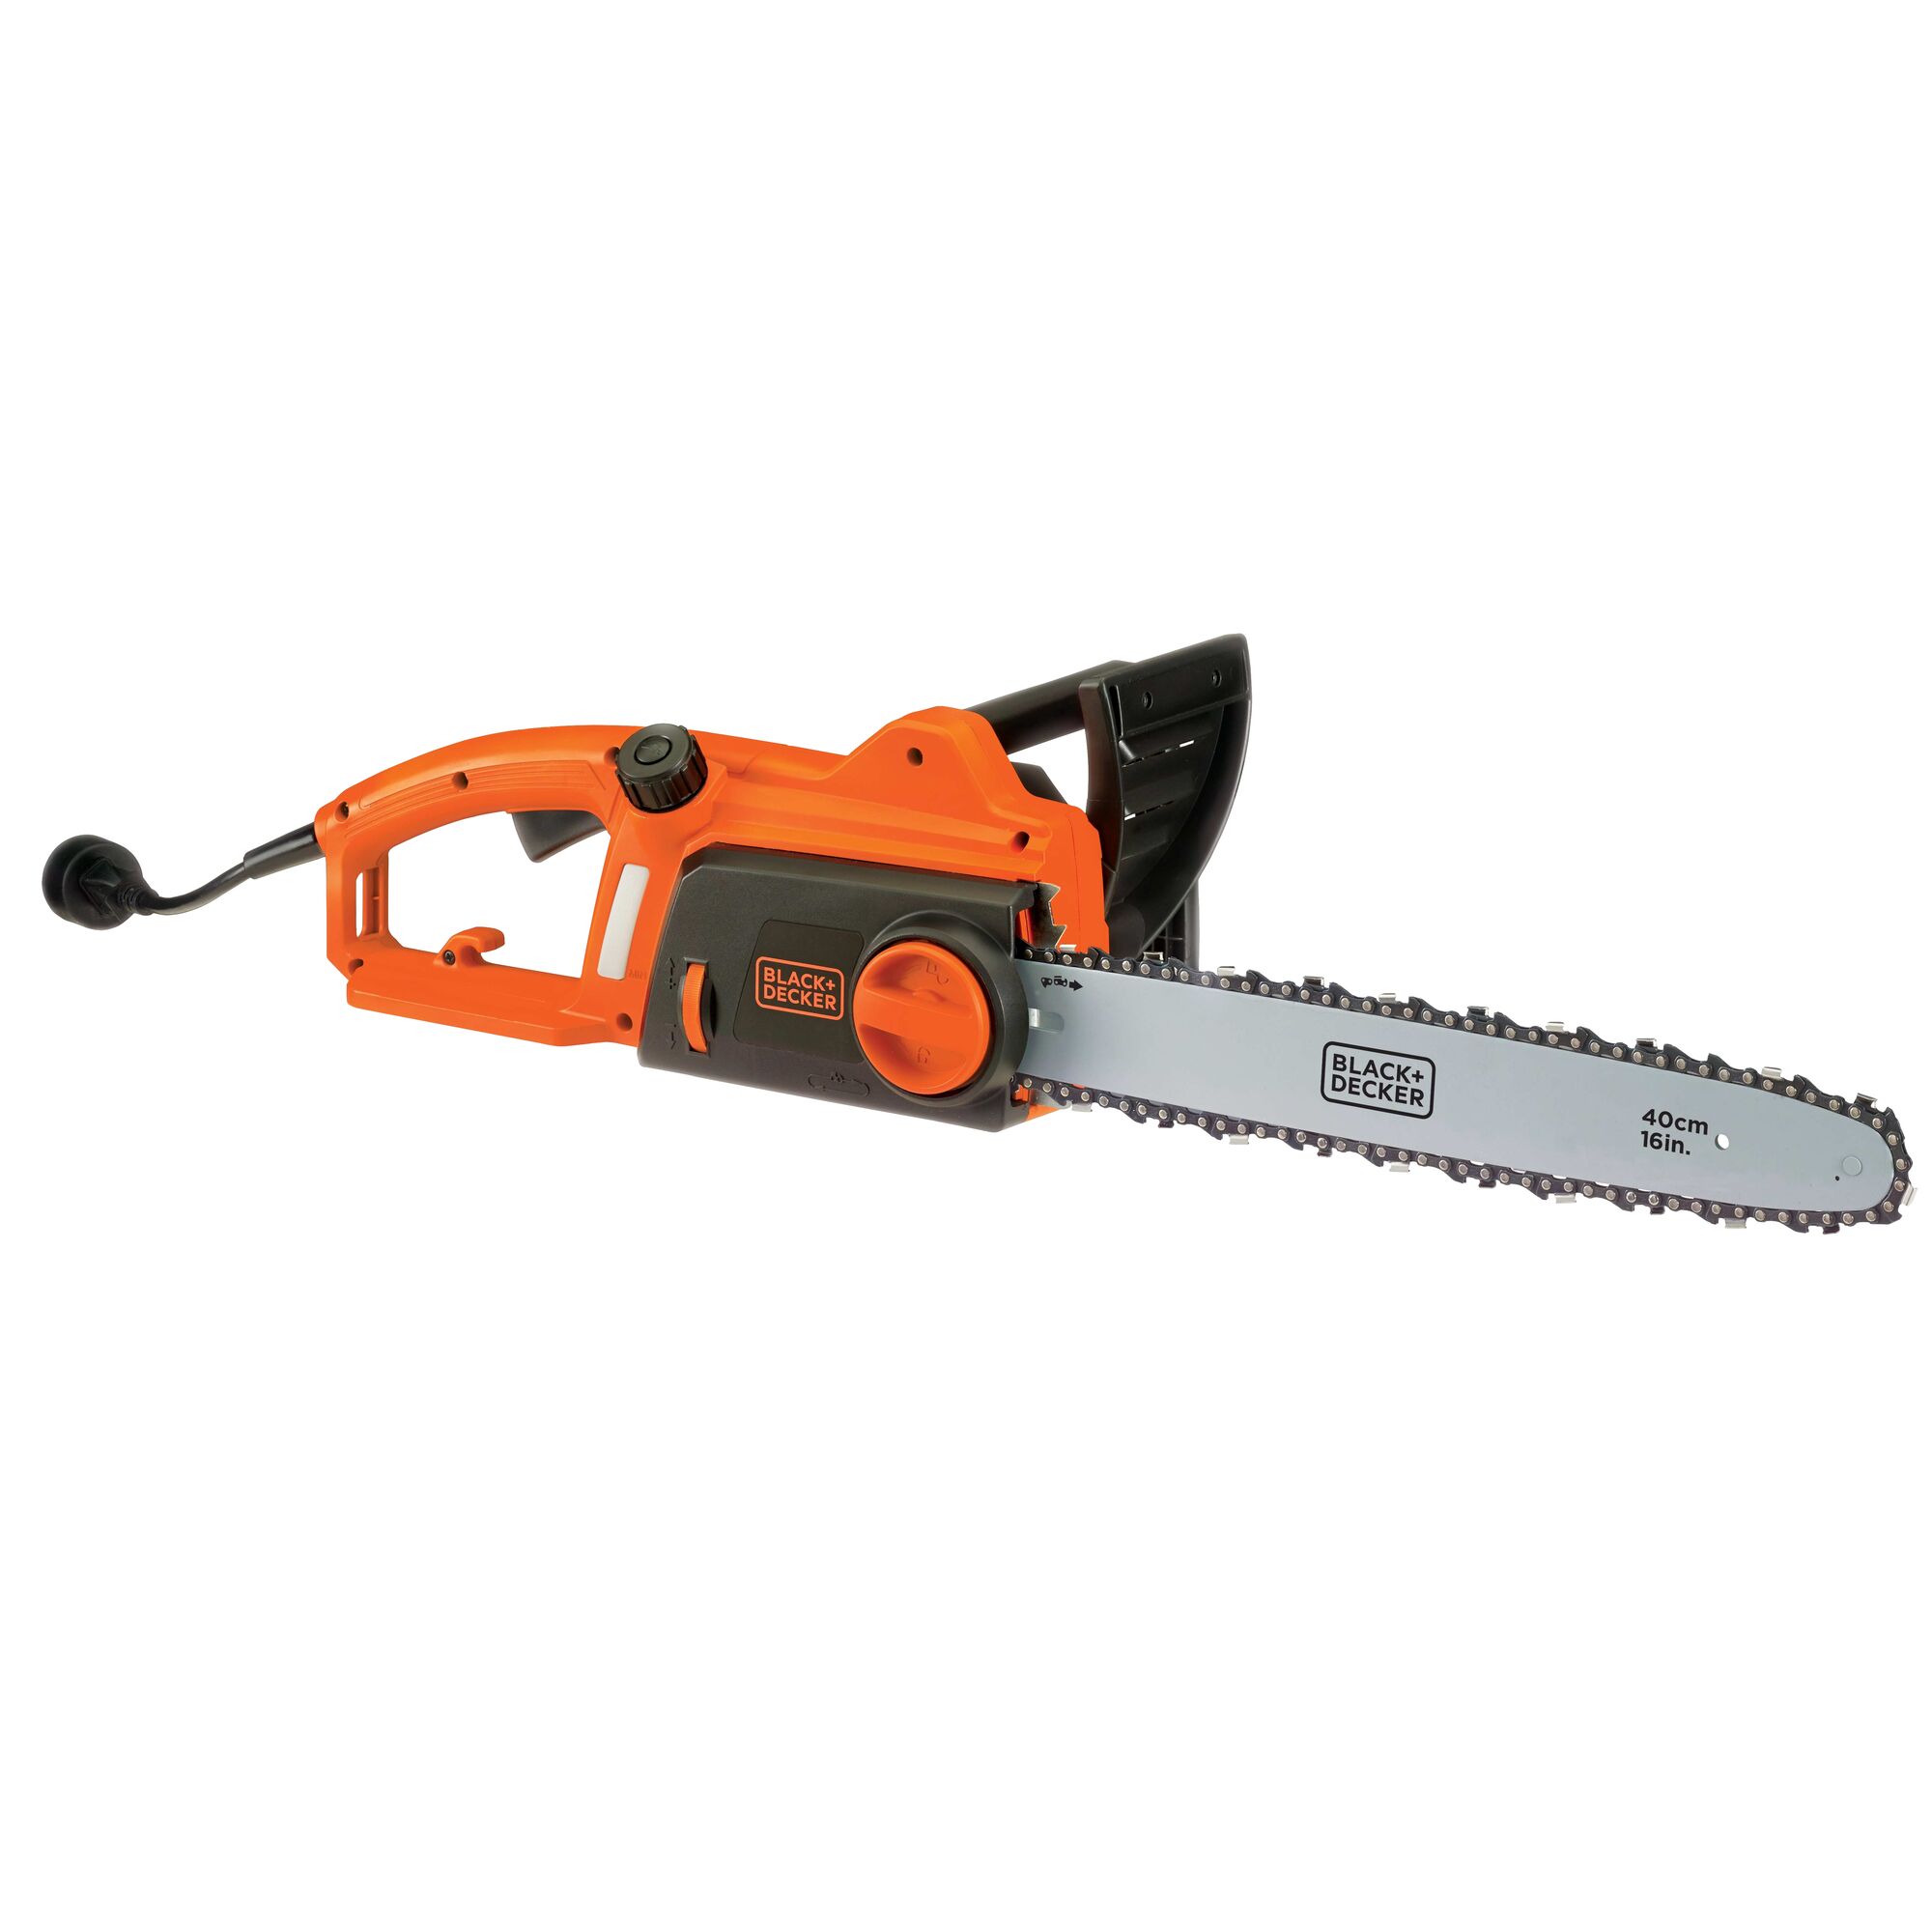 Profile of 12 Ampere 16 inch chainsaw.